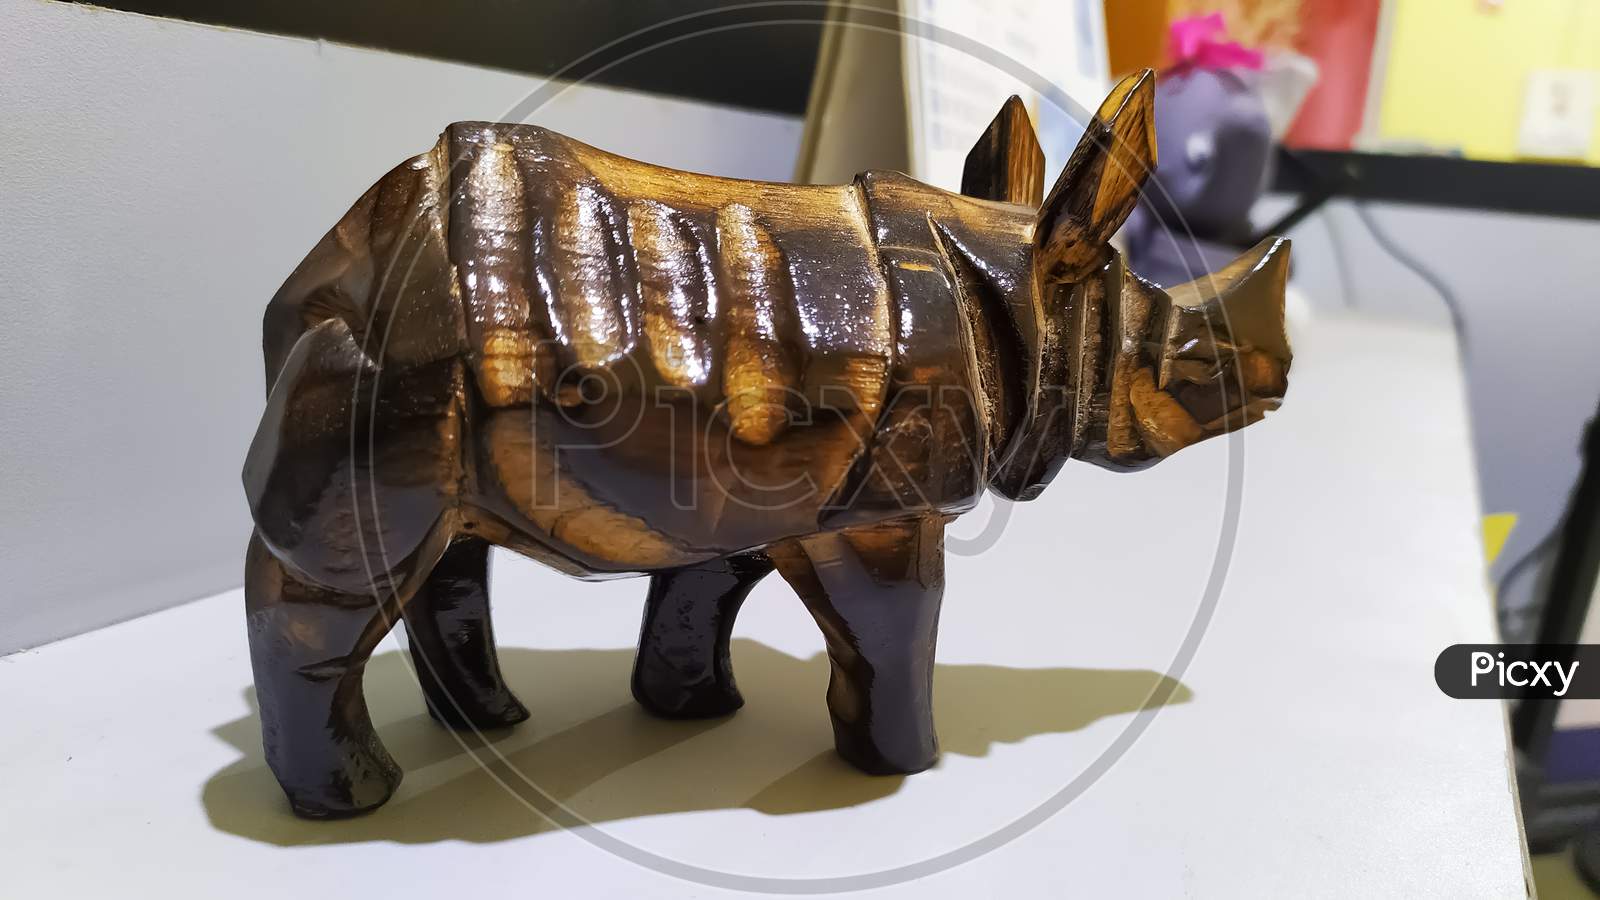 A wooden crafted one-horned rhinoceros